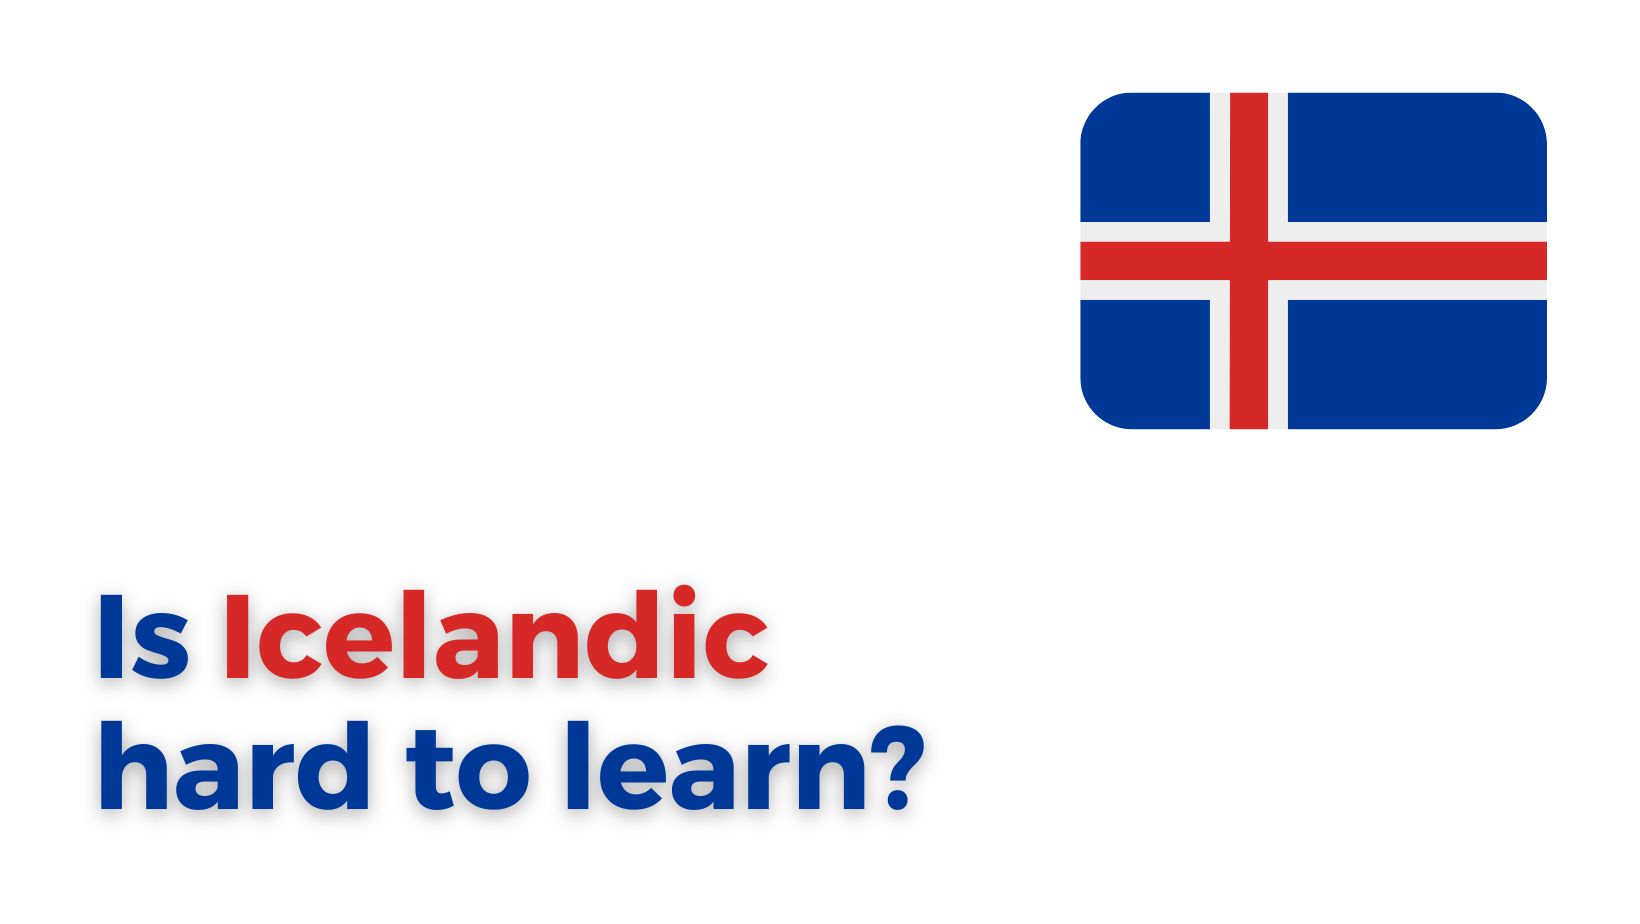 Is Icelandic hard to learn?